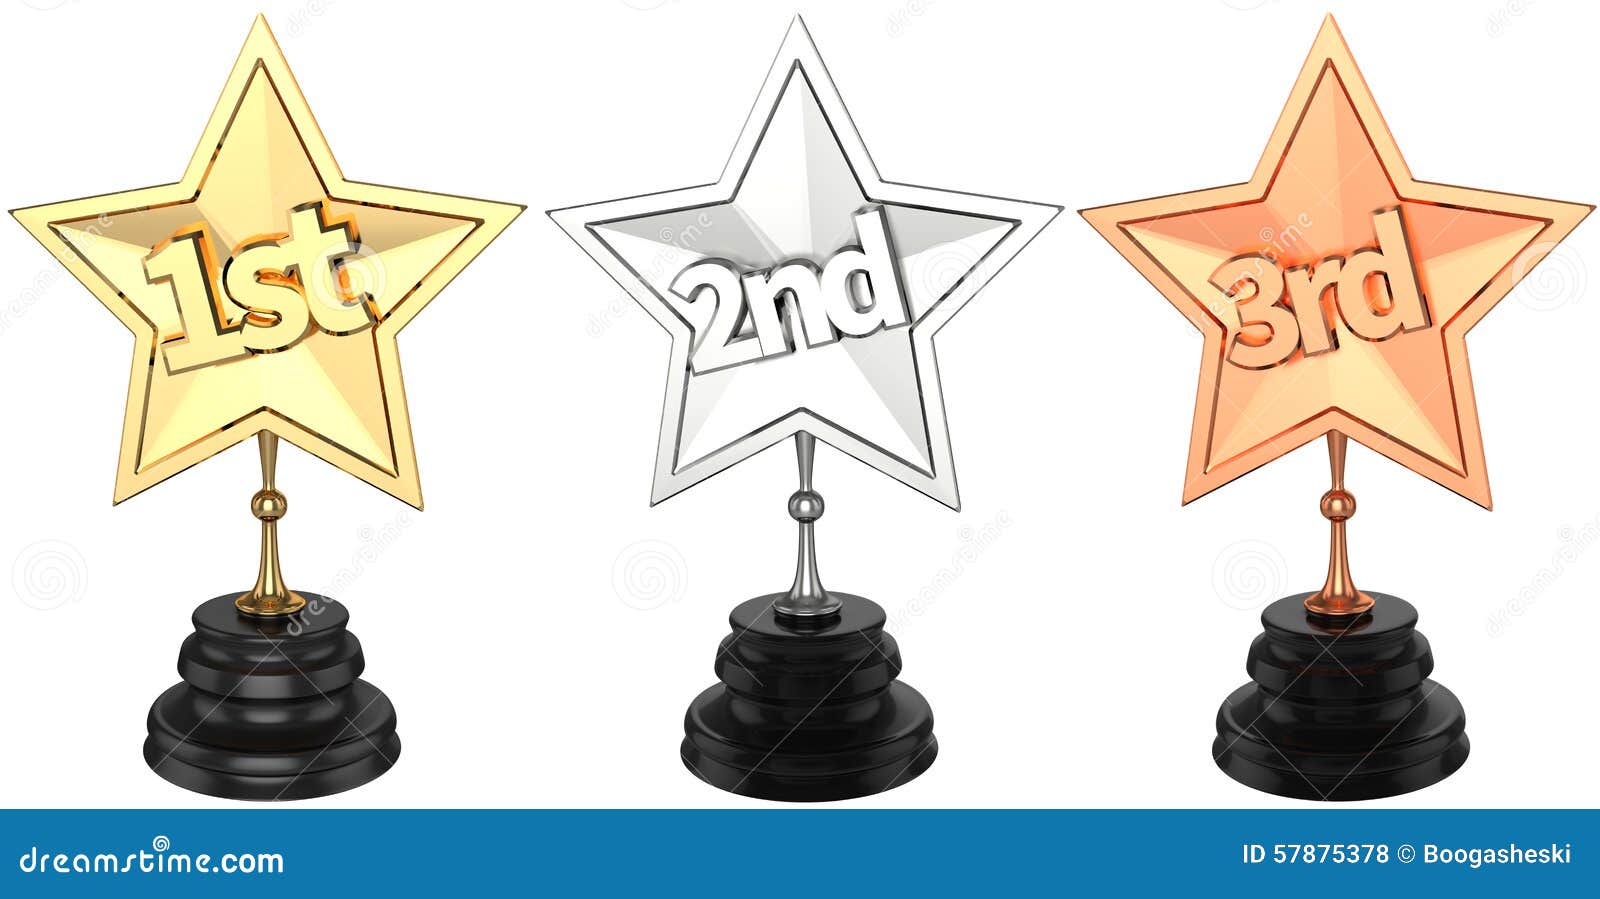 first-second-and-third-place-trophies-stock-illustration-image-57875378